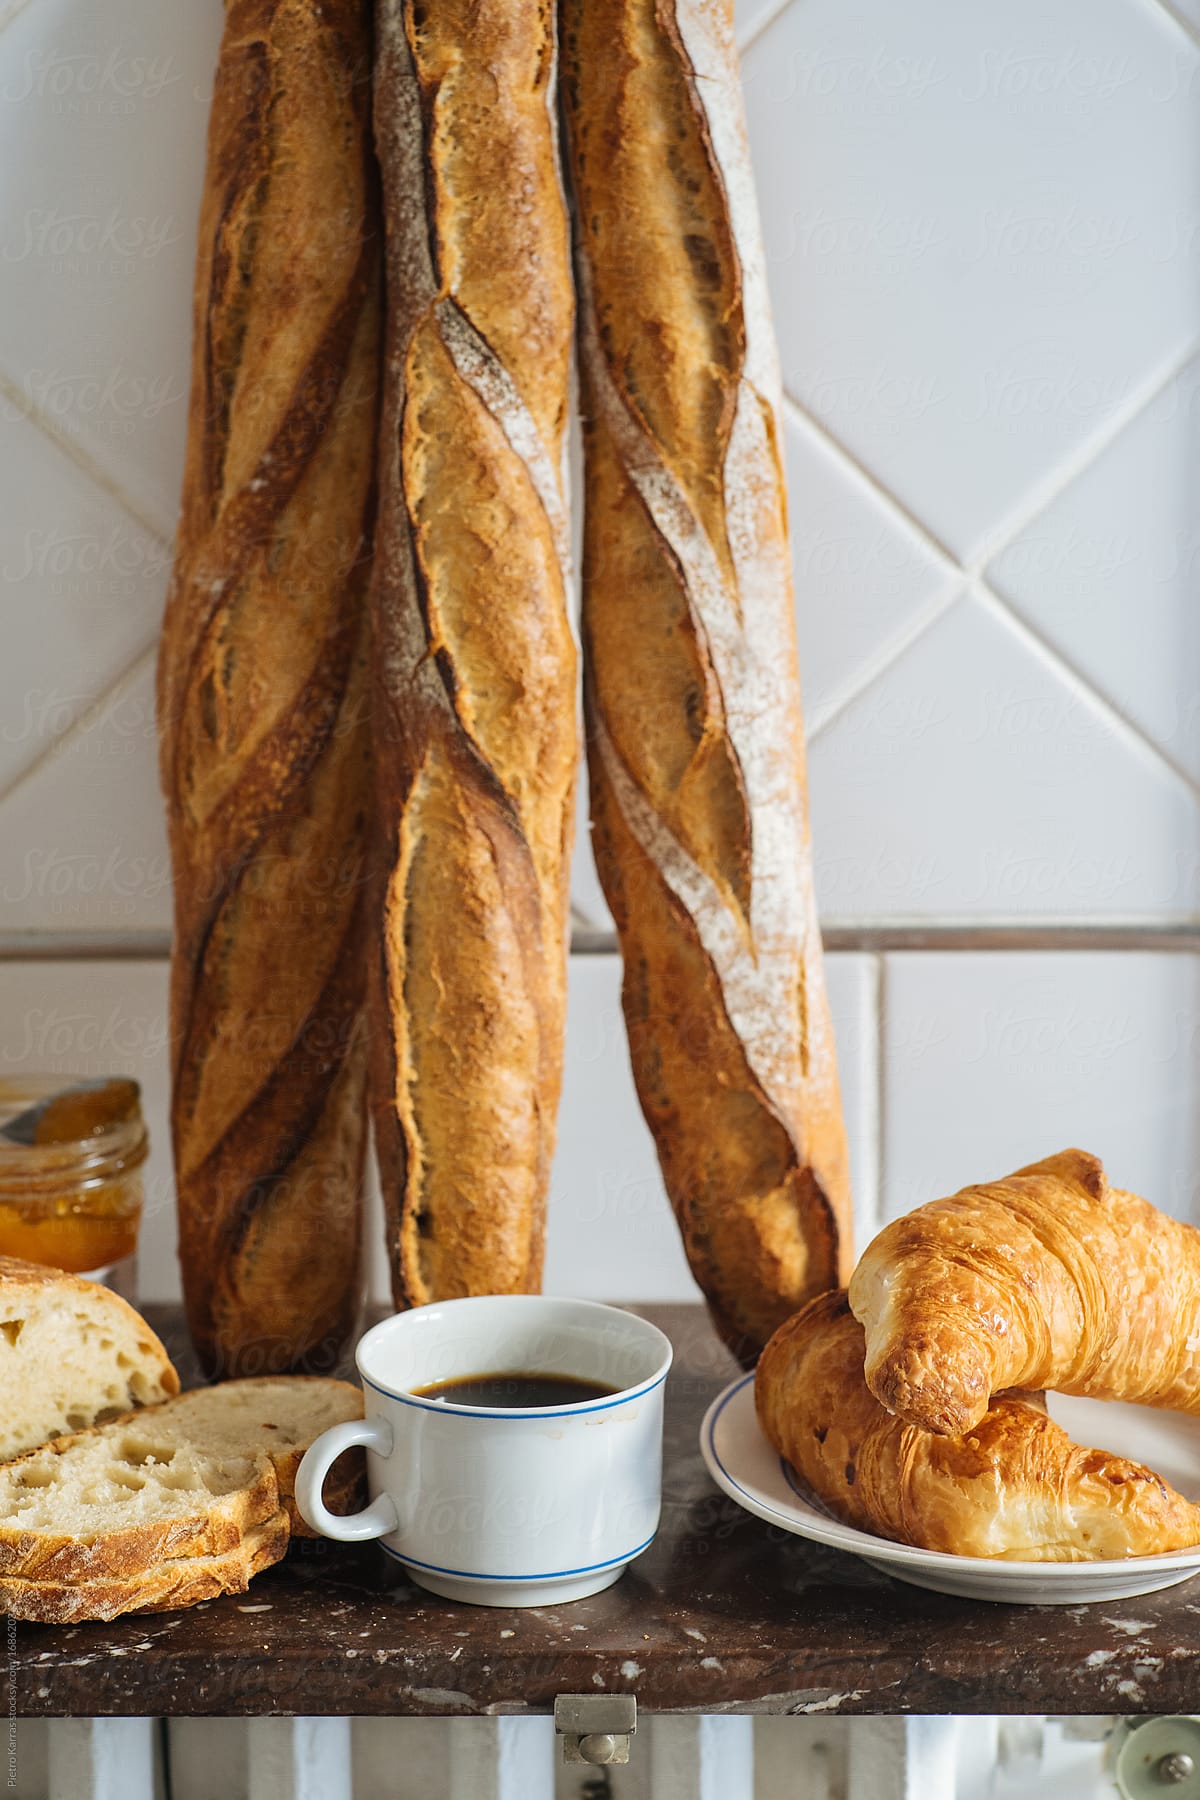 Traditional french bread and baget